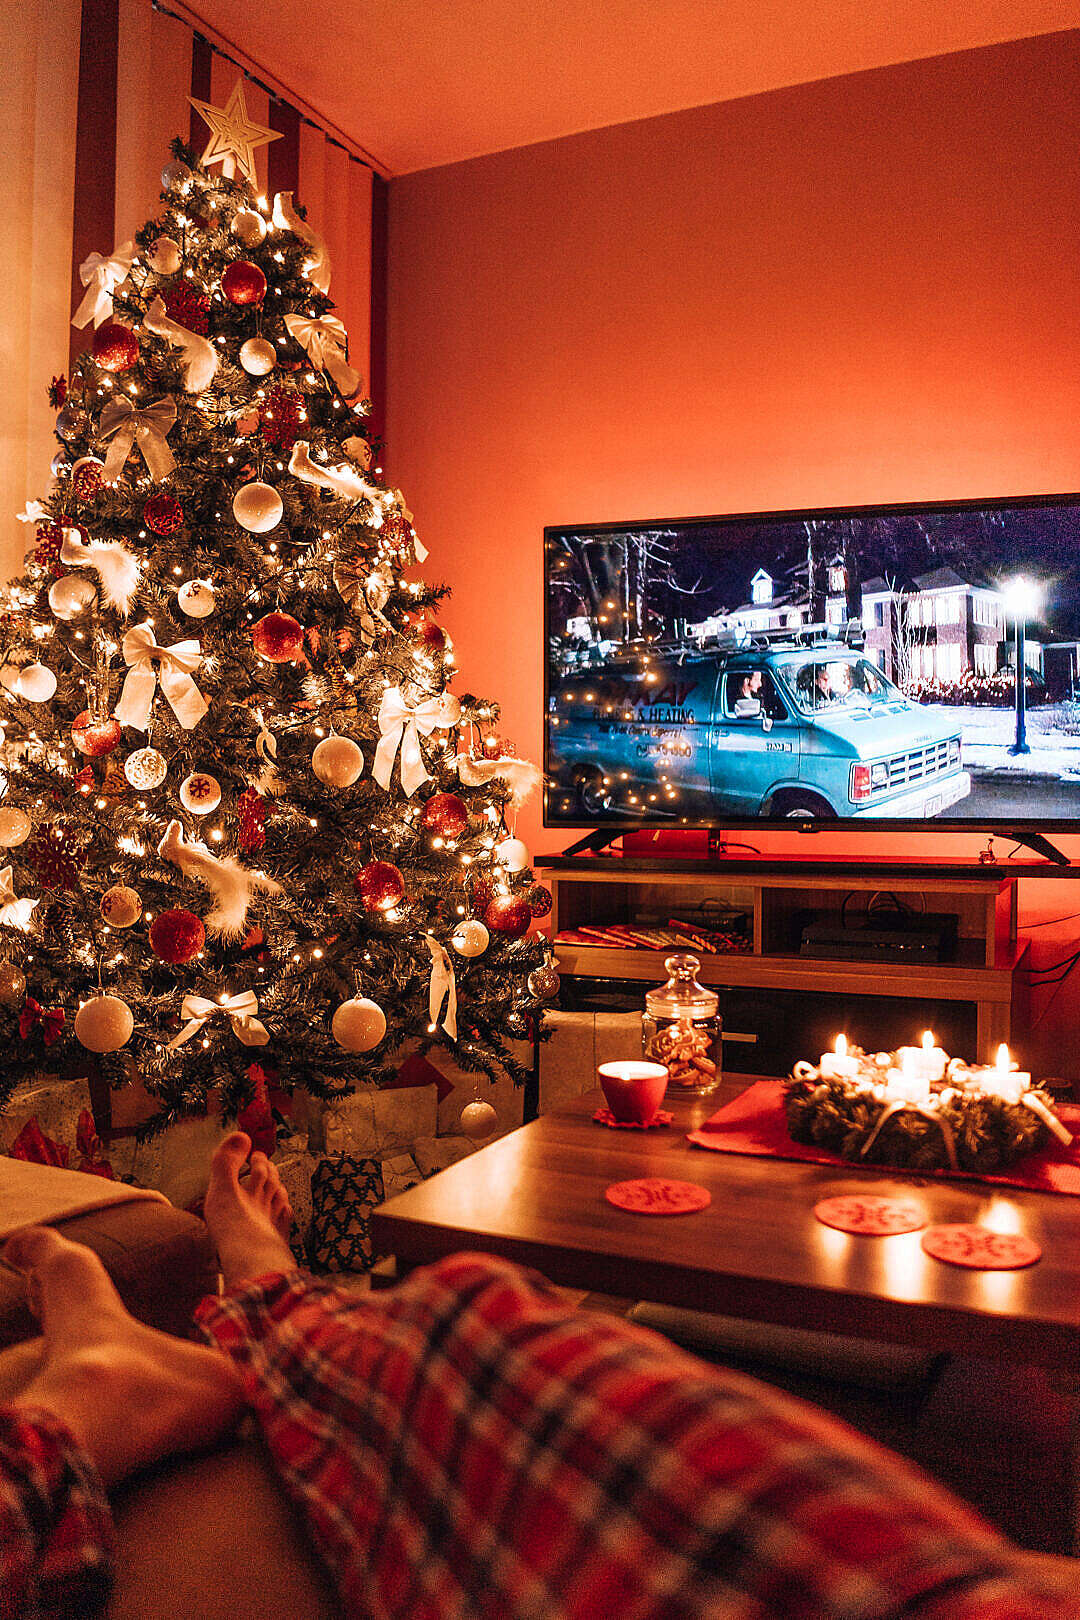 Man Relaxing in a Living Room and Watching a Christmas Movie in the Evening